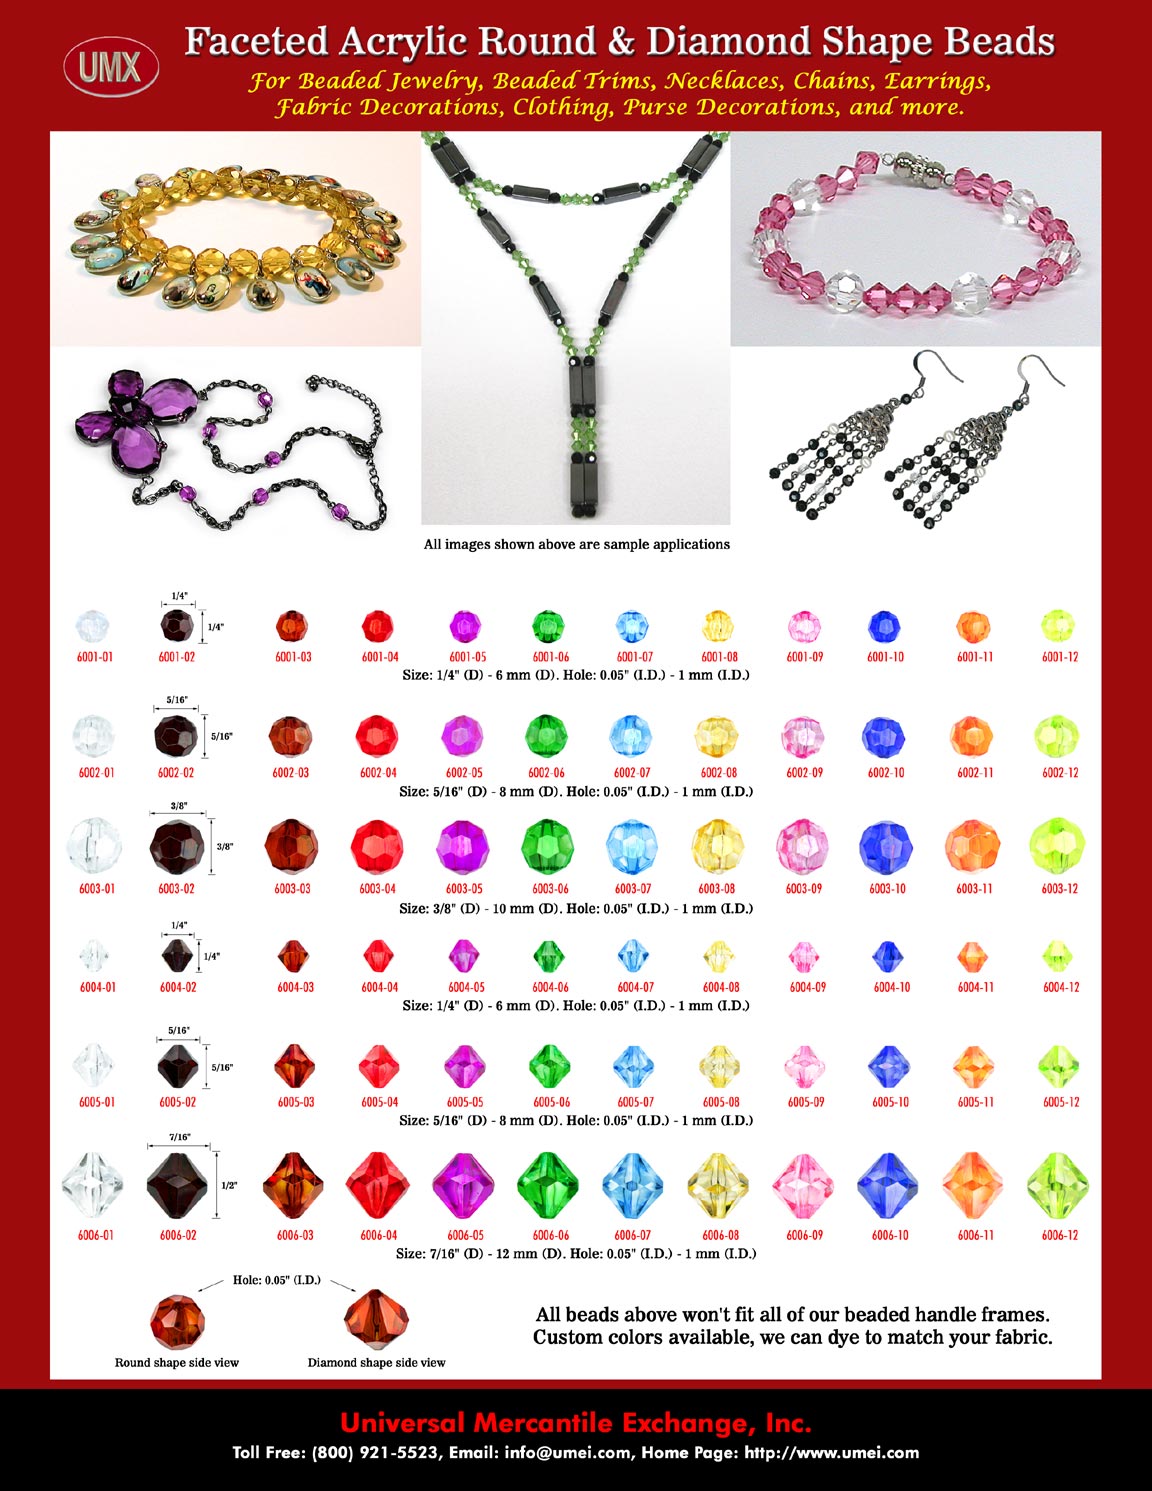 Earring Beads and Earrings Bead Supply Store.